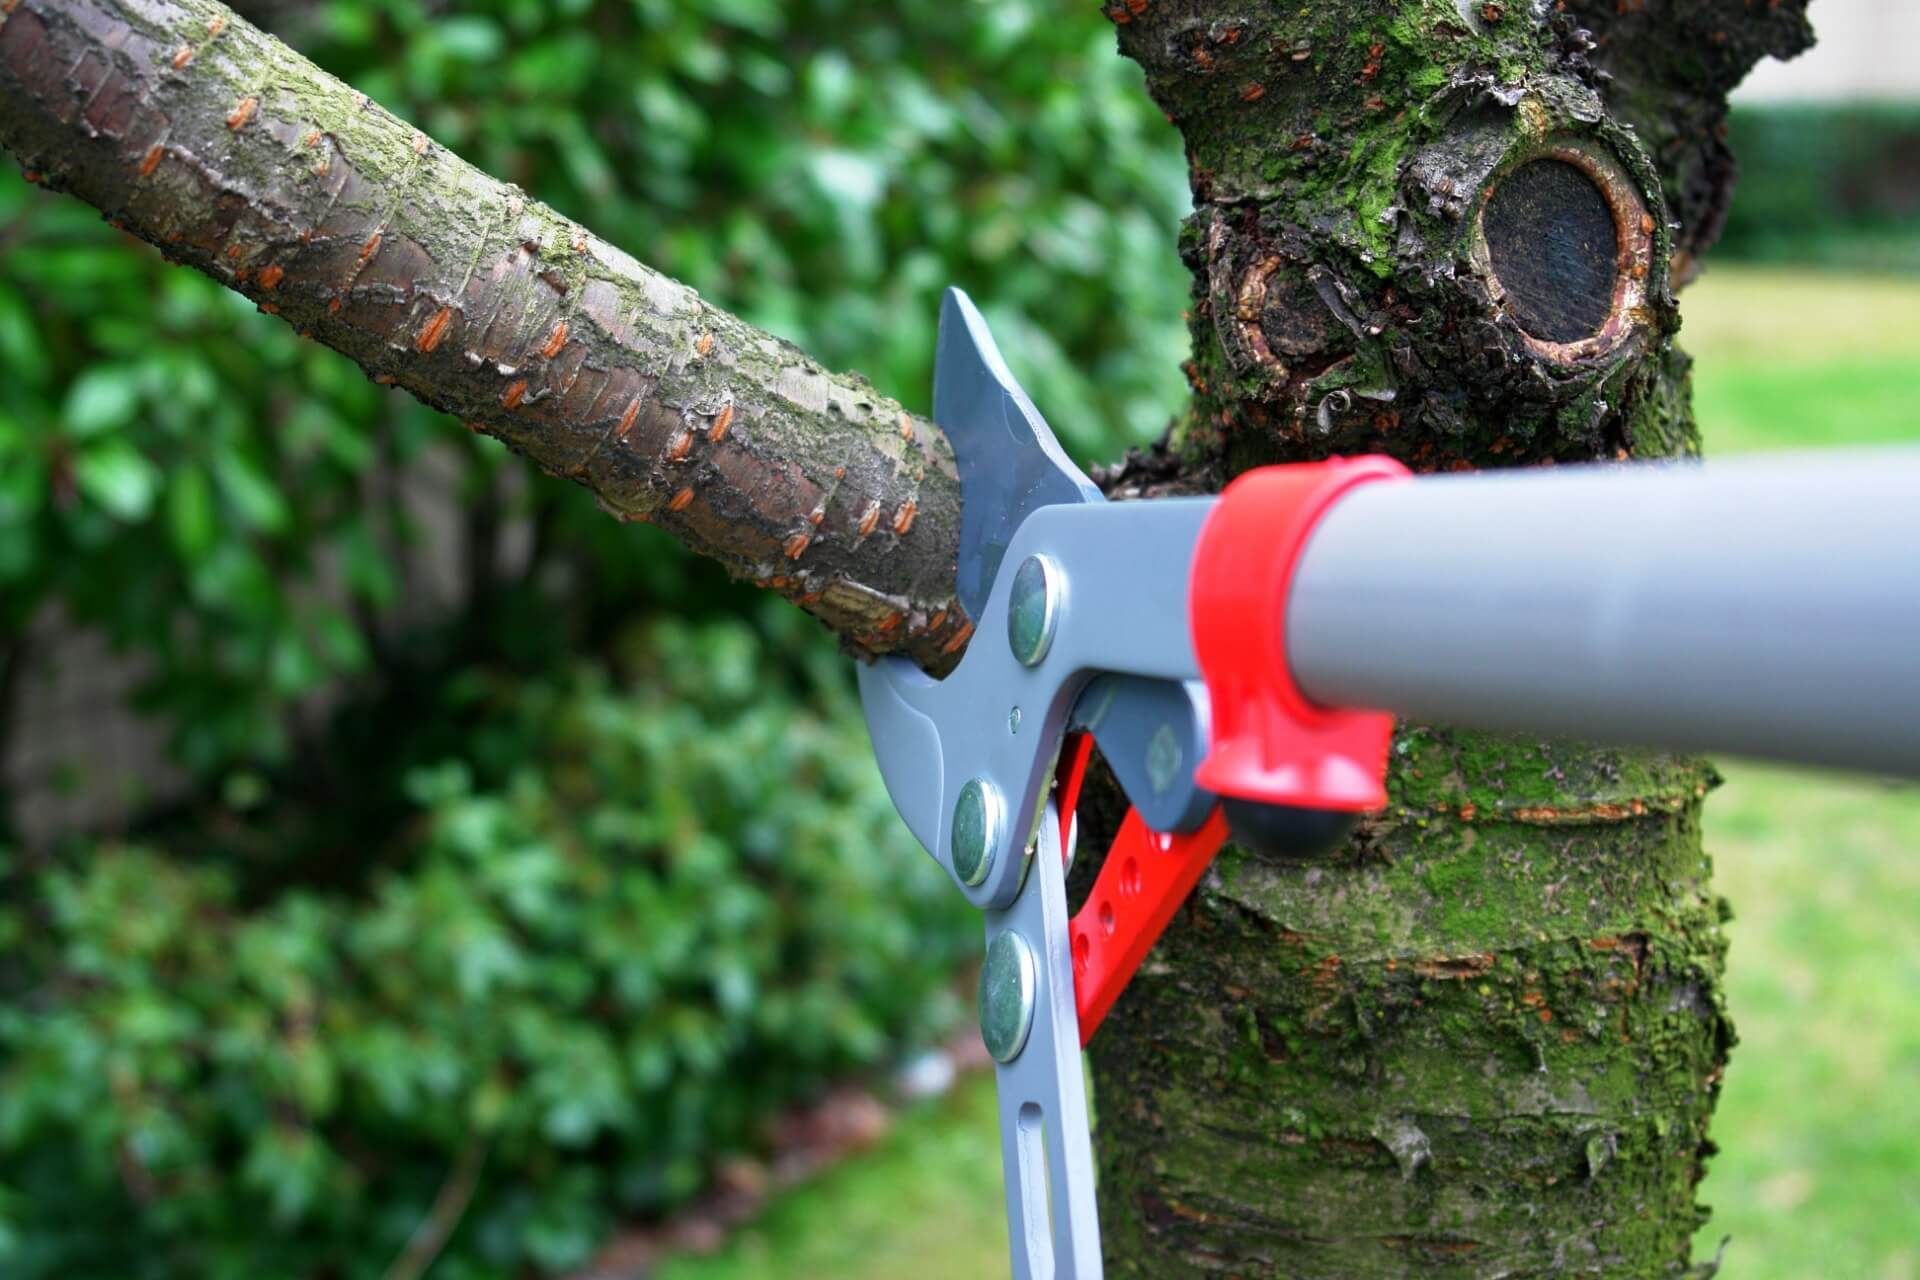 A person is cutting a tree branch with a pair of scissors